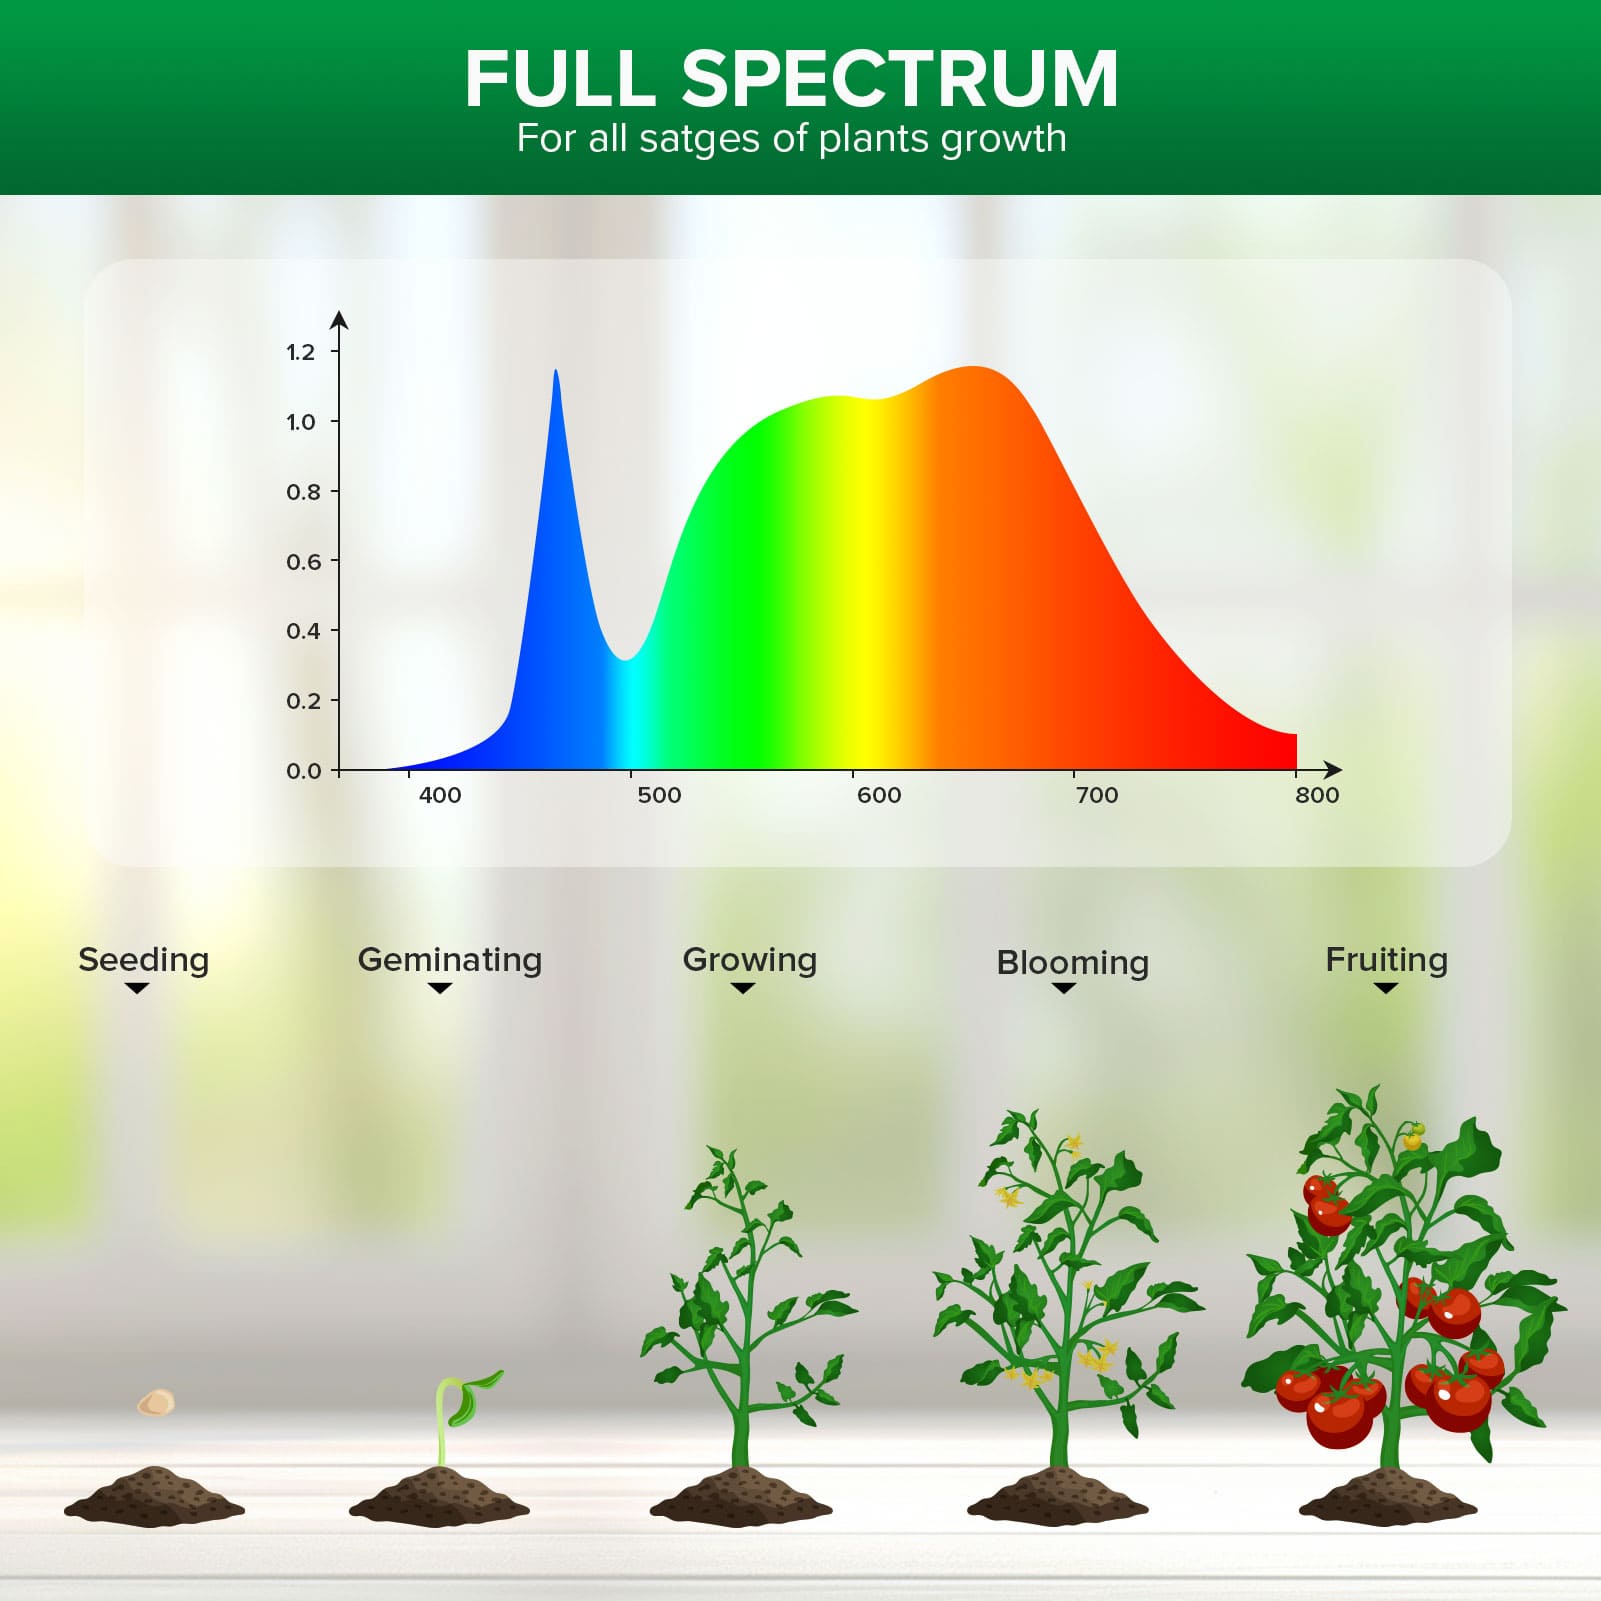 FULL SPECTRUM For all stages of plants growth.